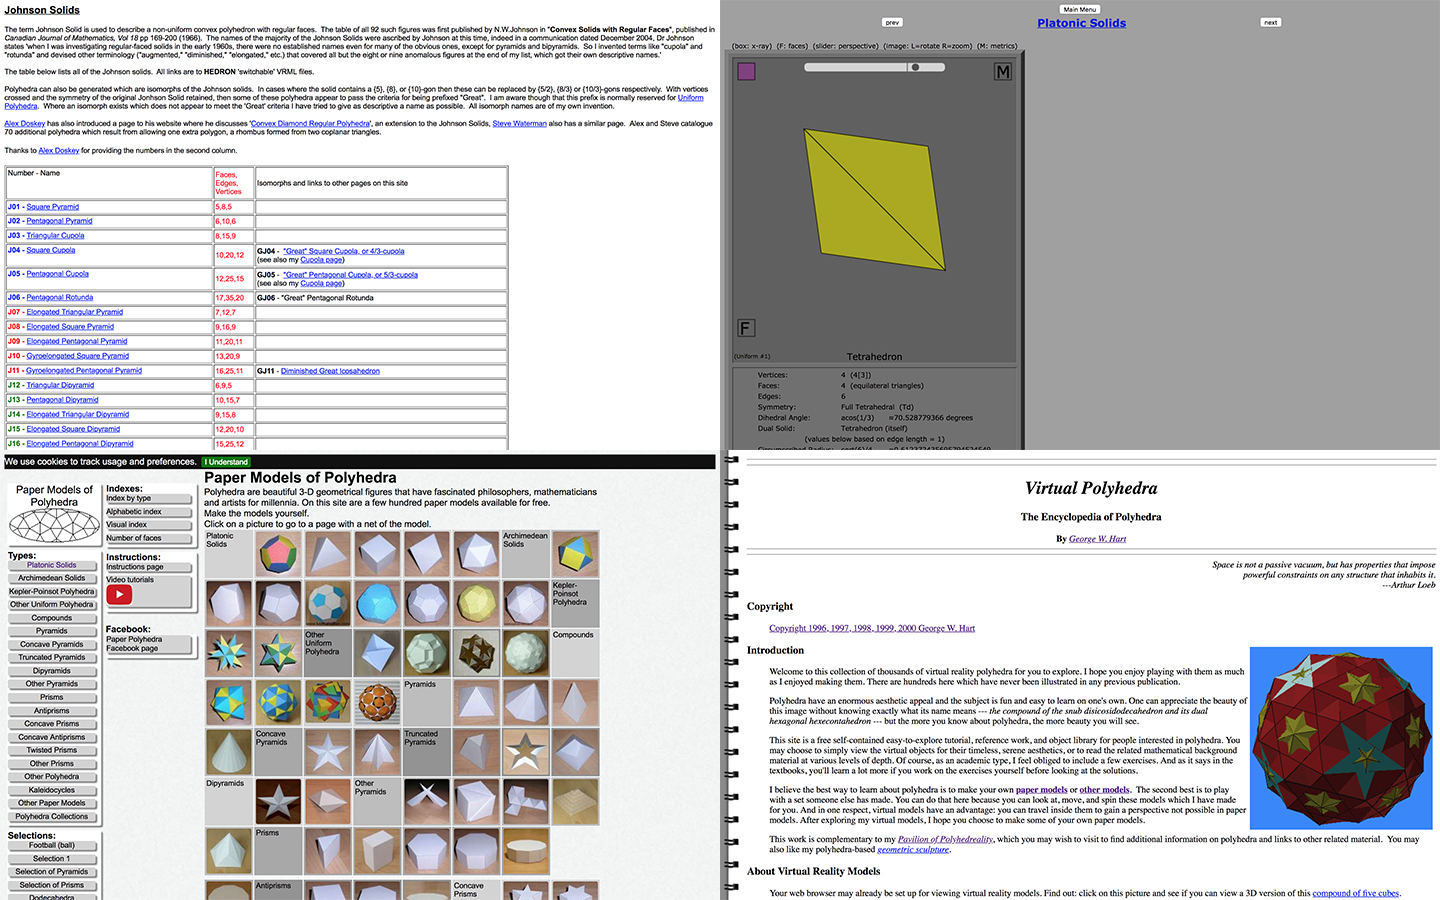 Screenshots of different polyhedron websites